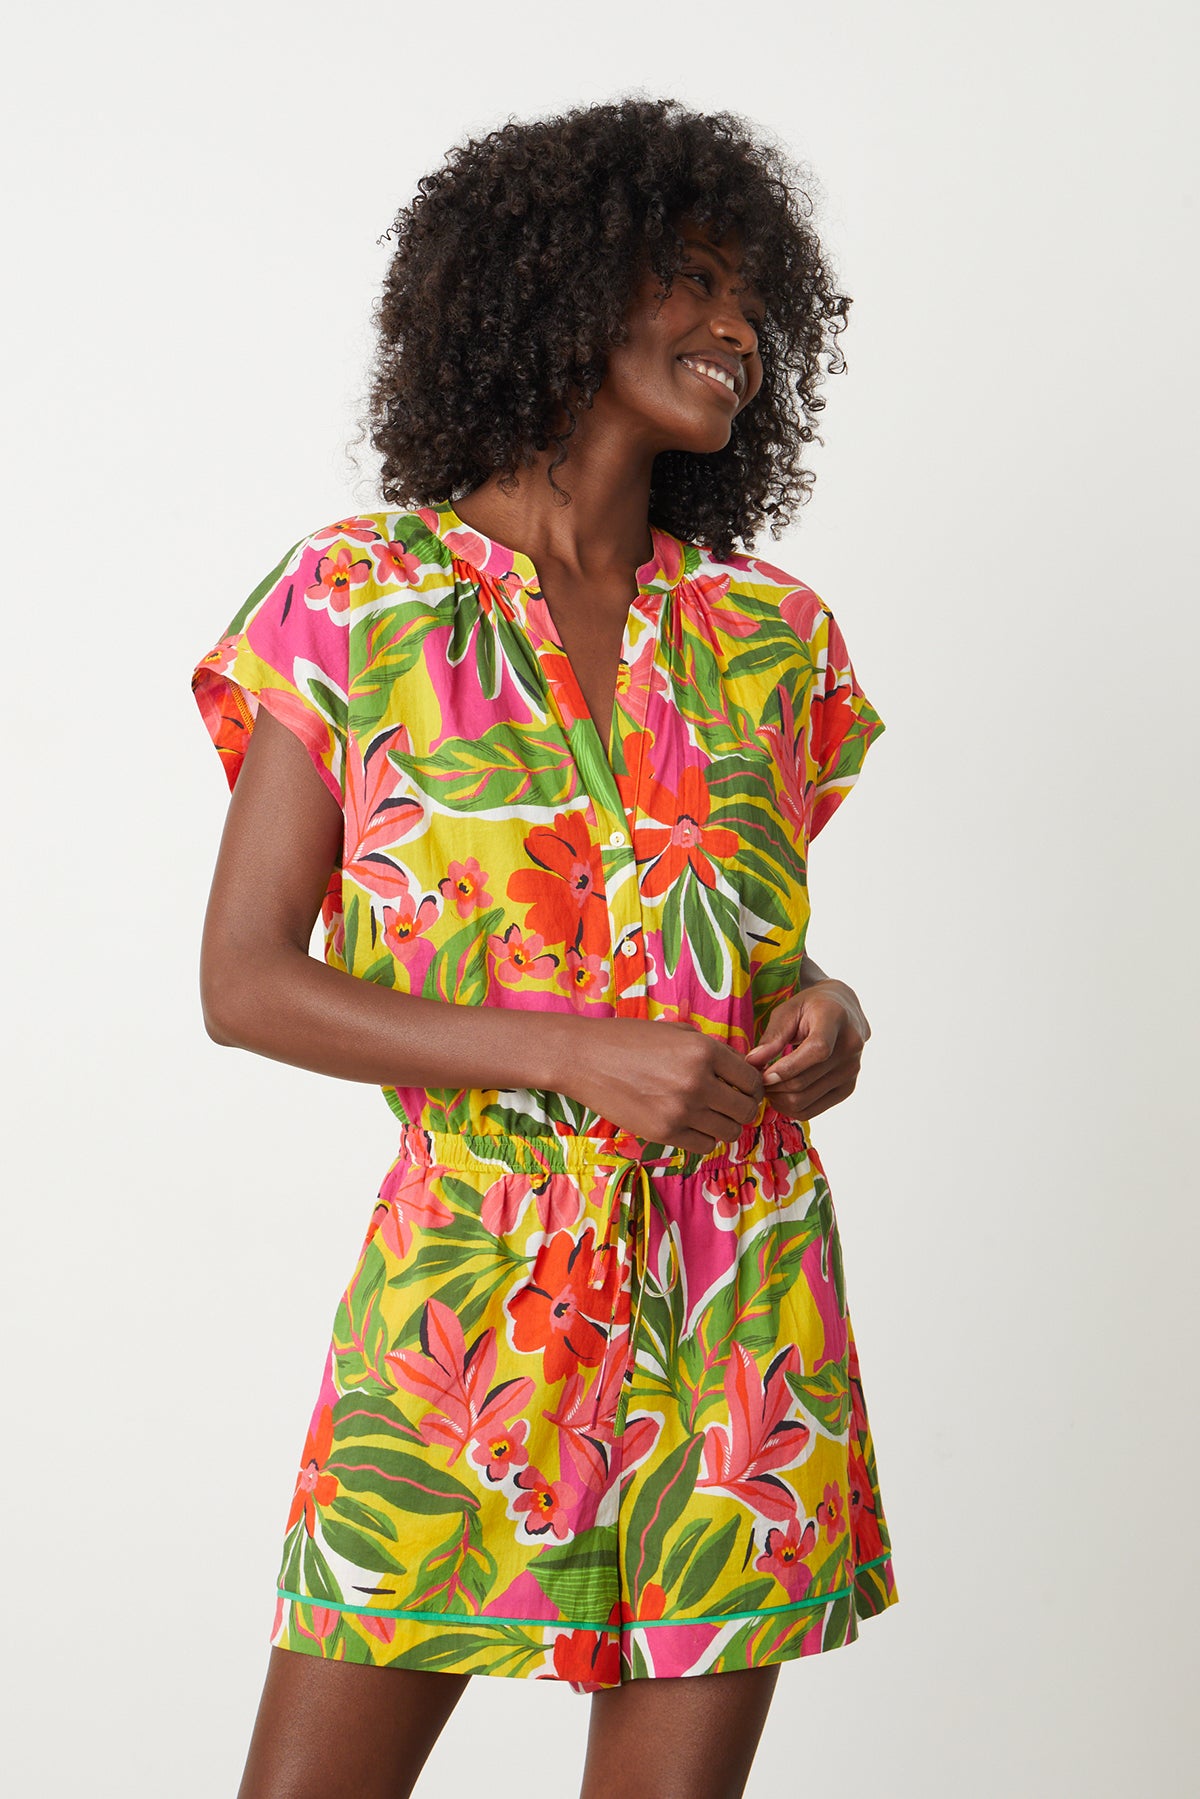 Pam Romper in bold floral aloha print with reds, hot pinks and greens front-26462109925569